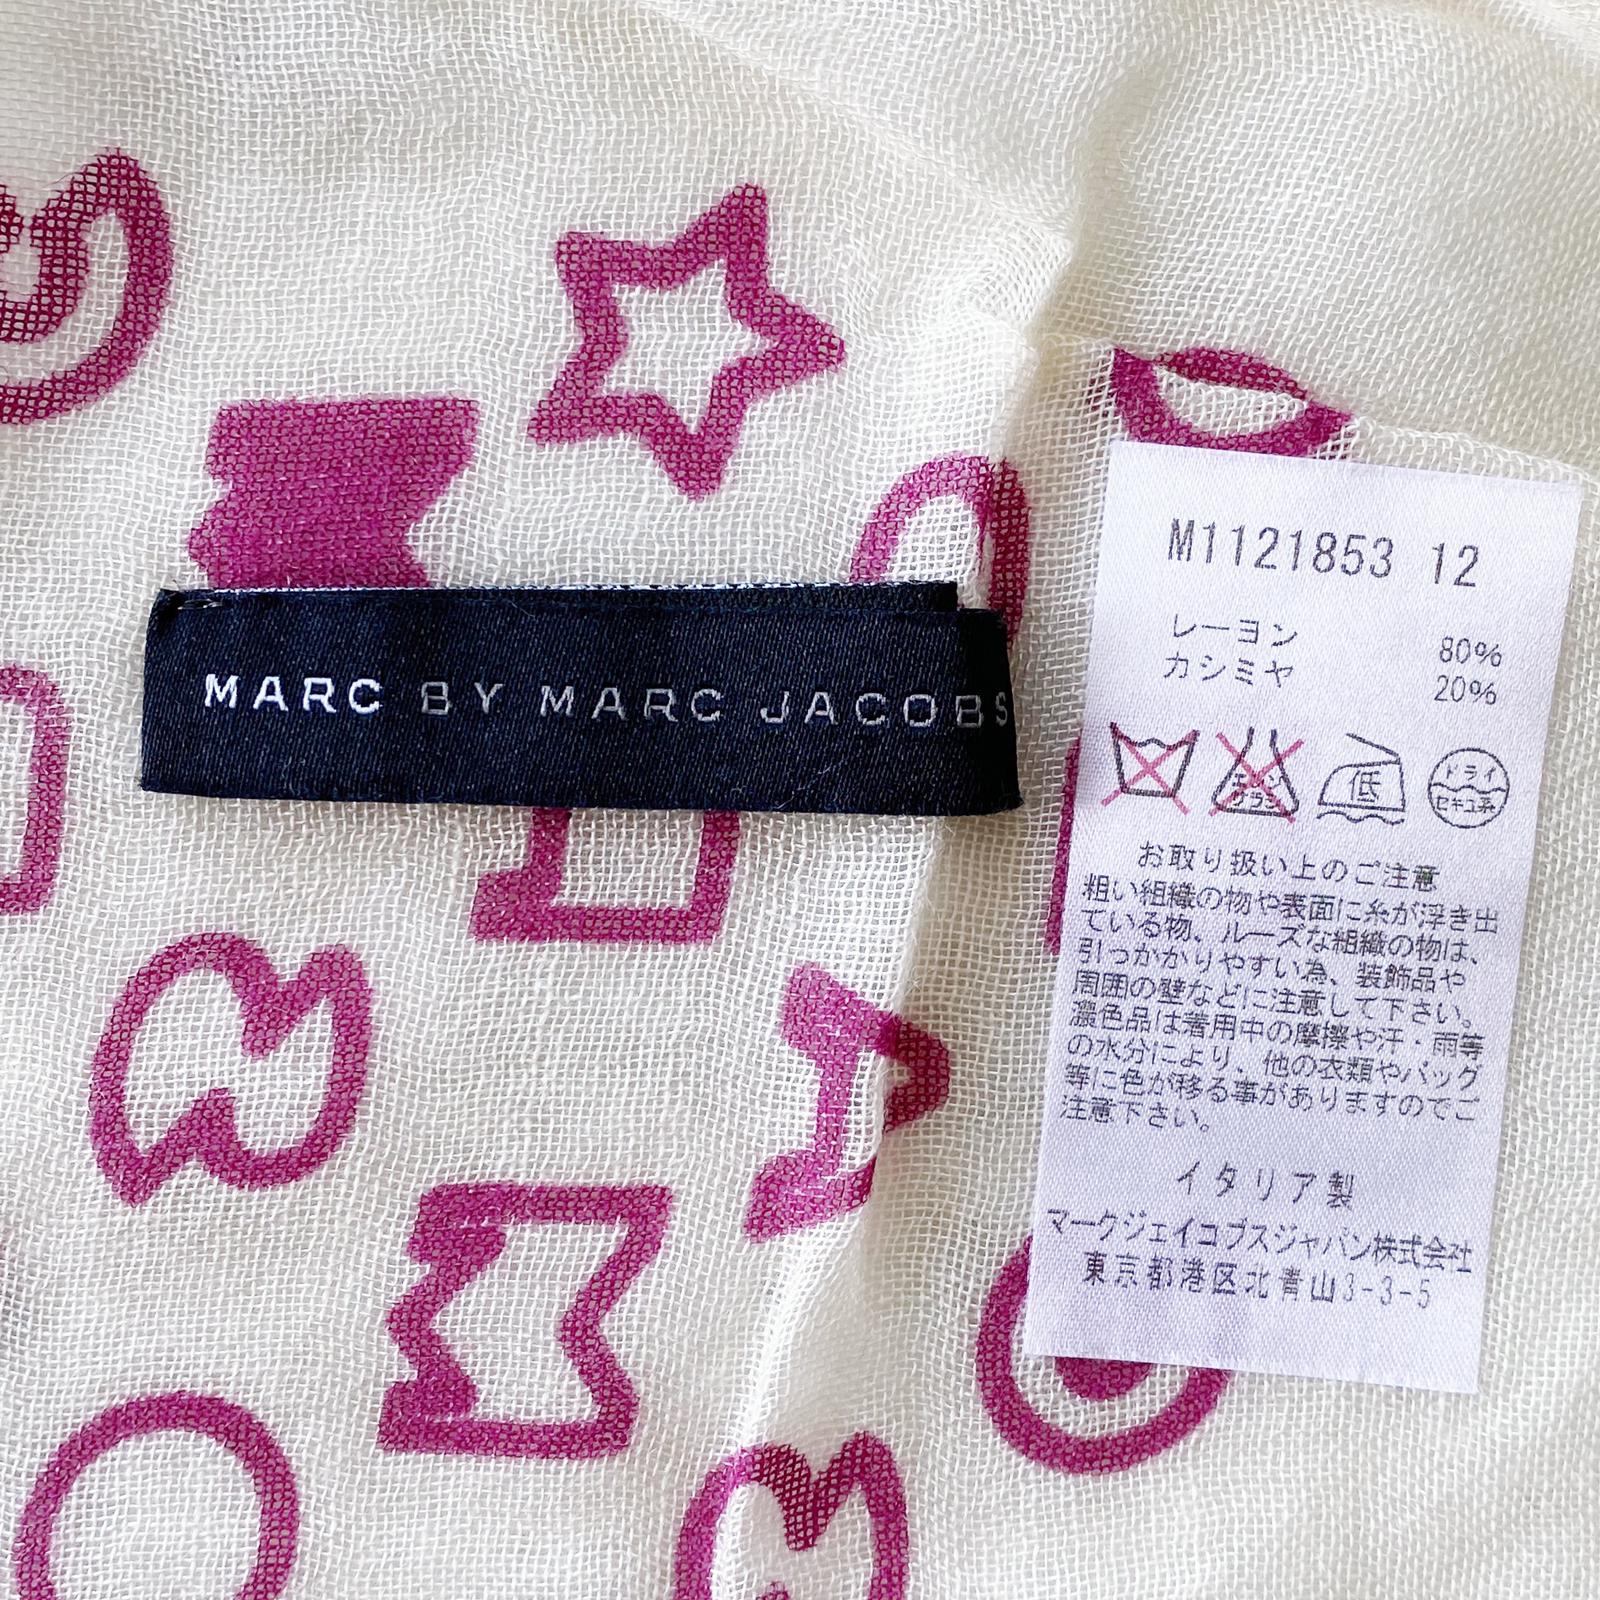 Marc by Marc Jacobs Beige Viscose & Cashmere Scarf